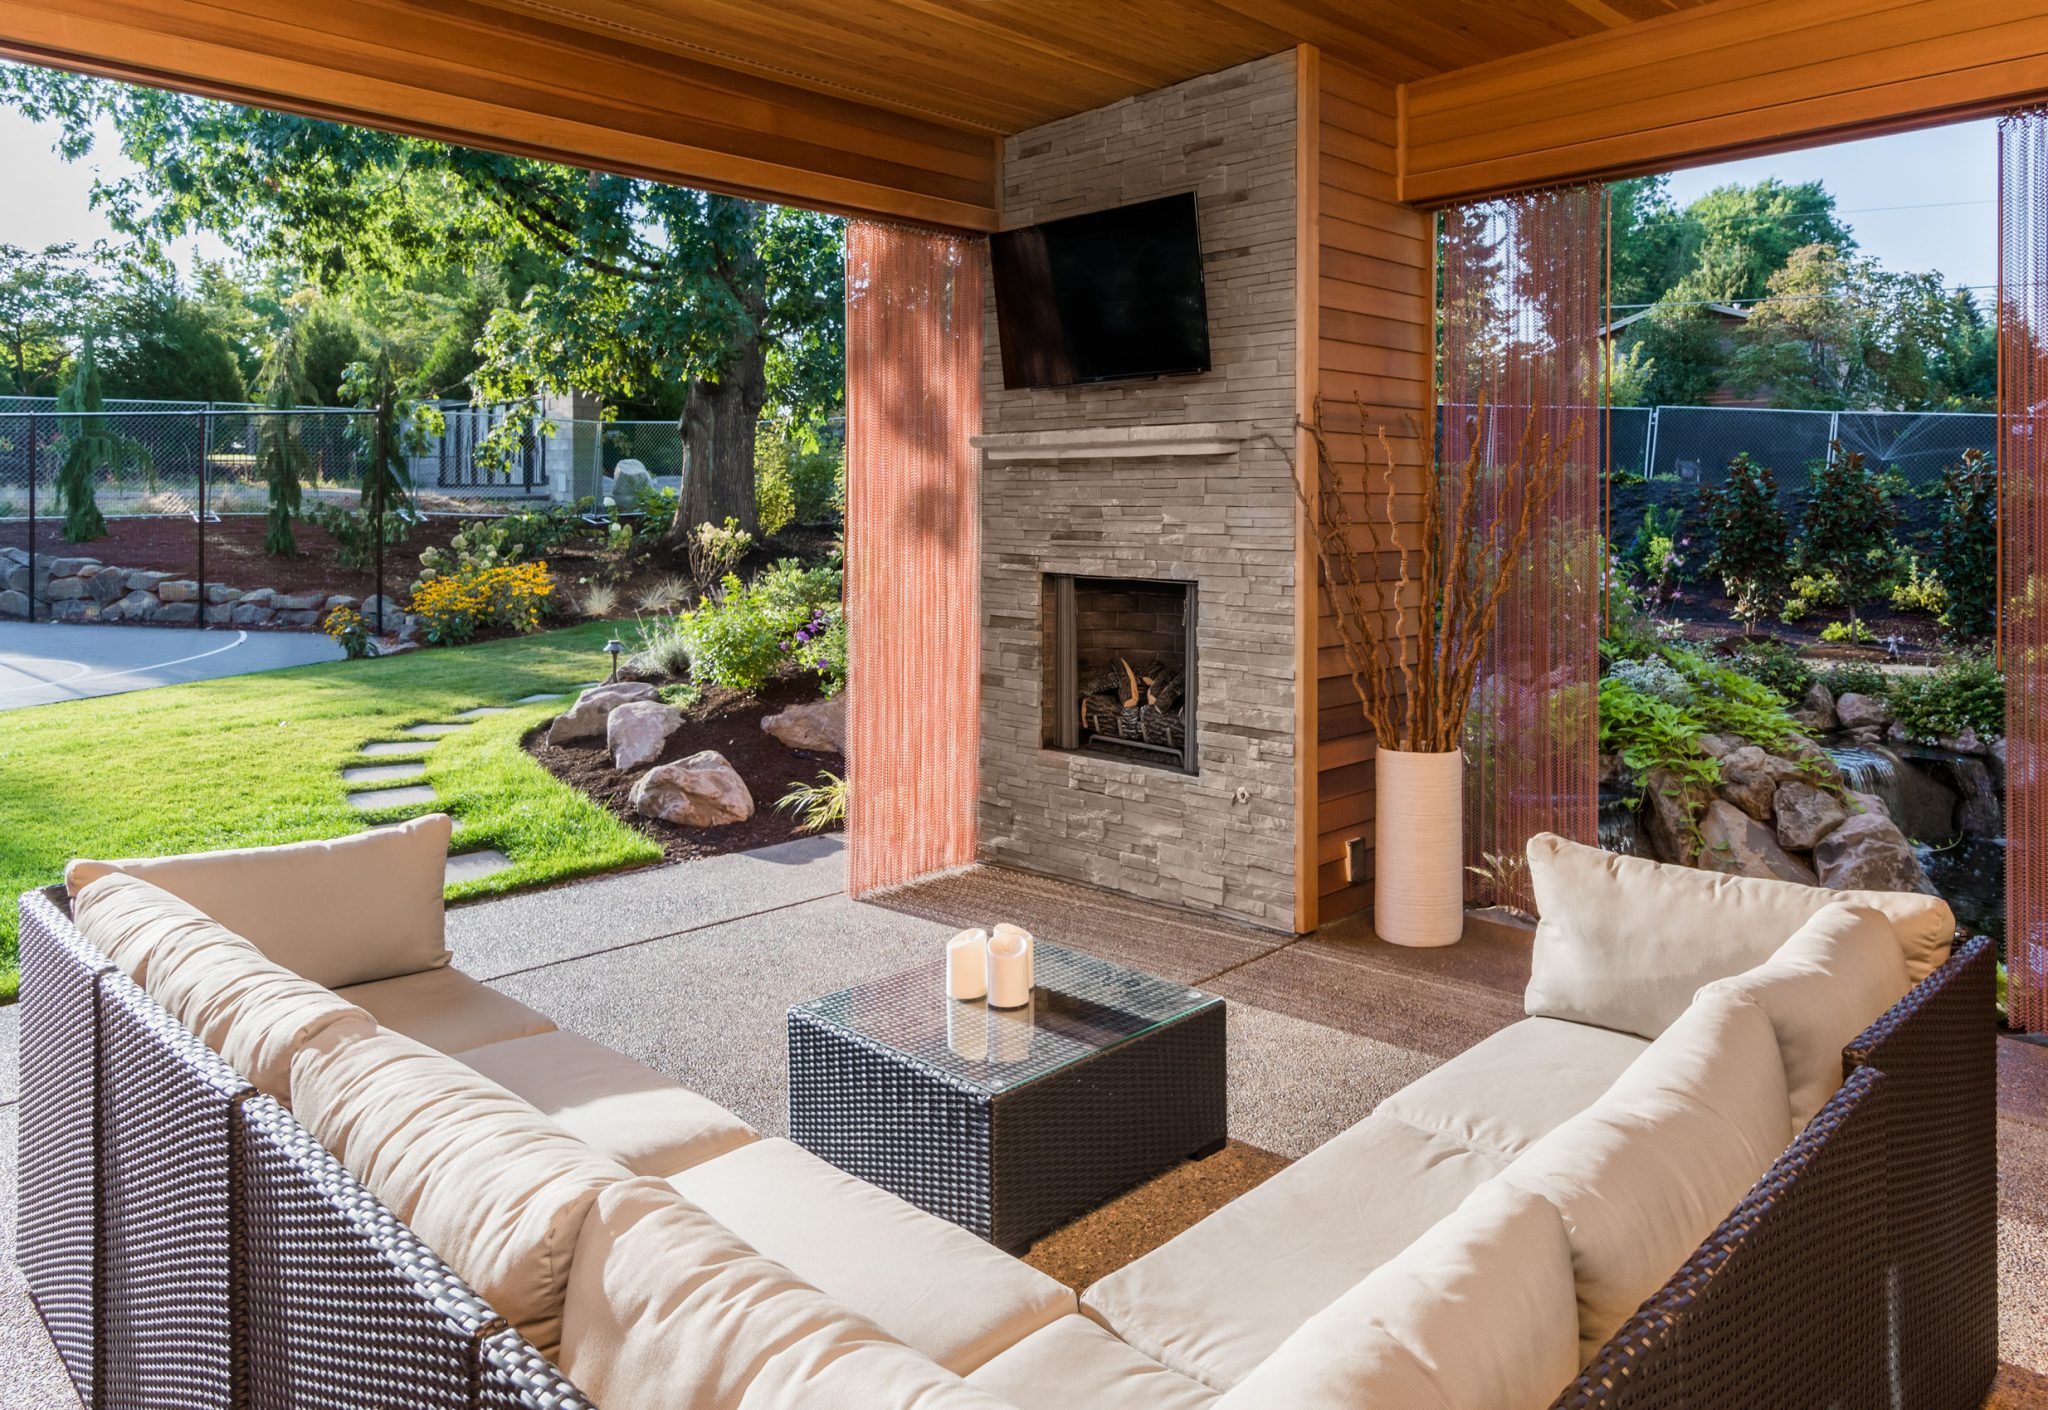  Patios and Outdoor Living Spaces